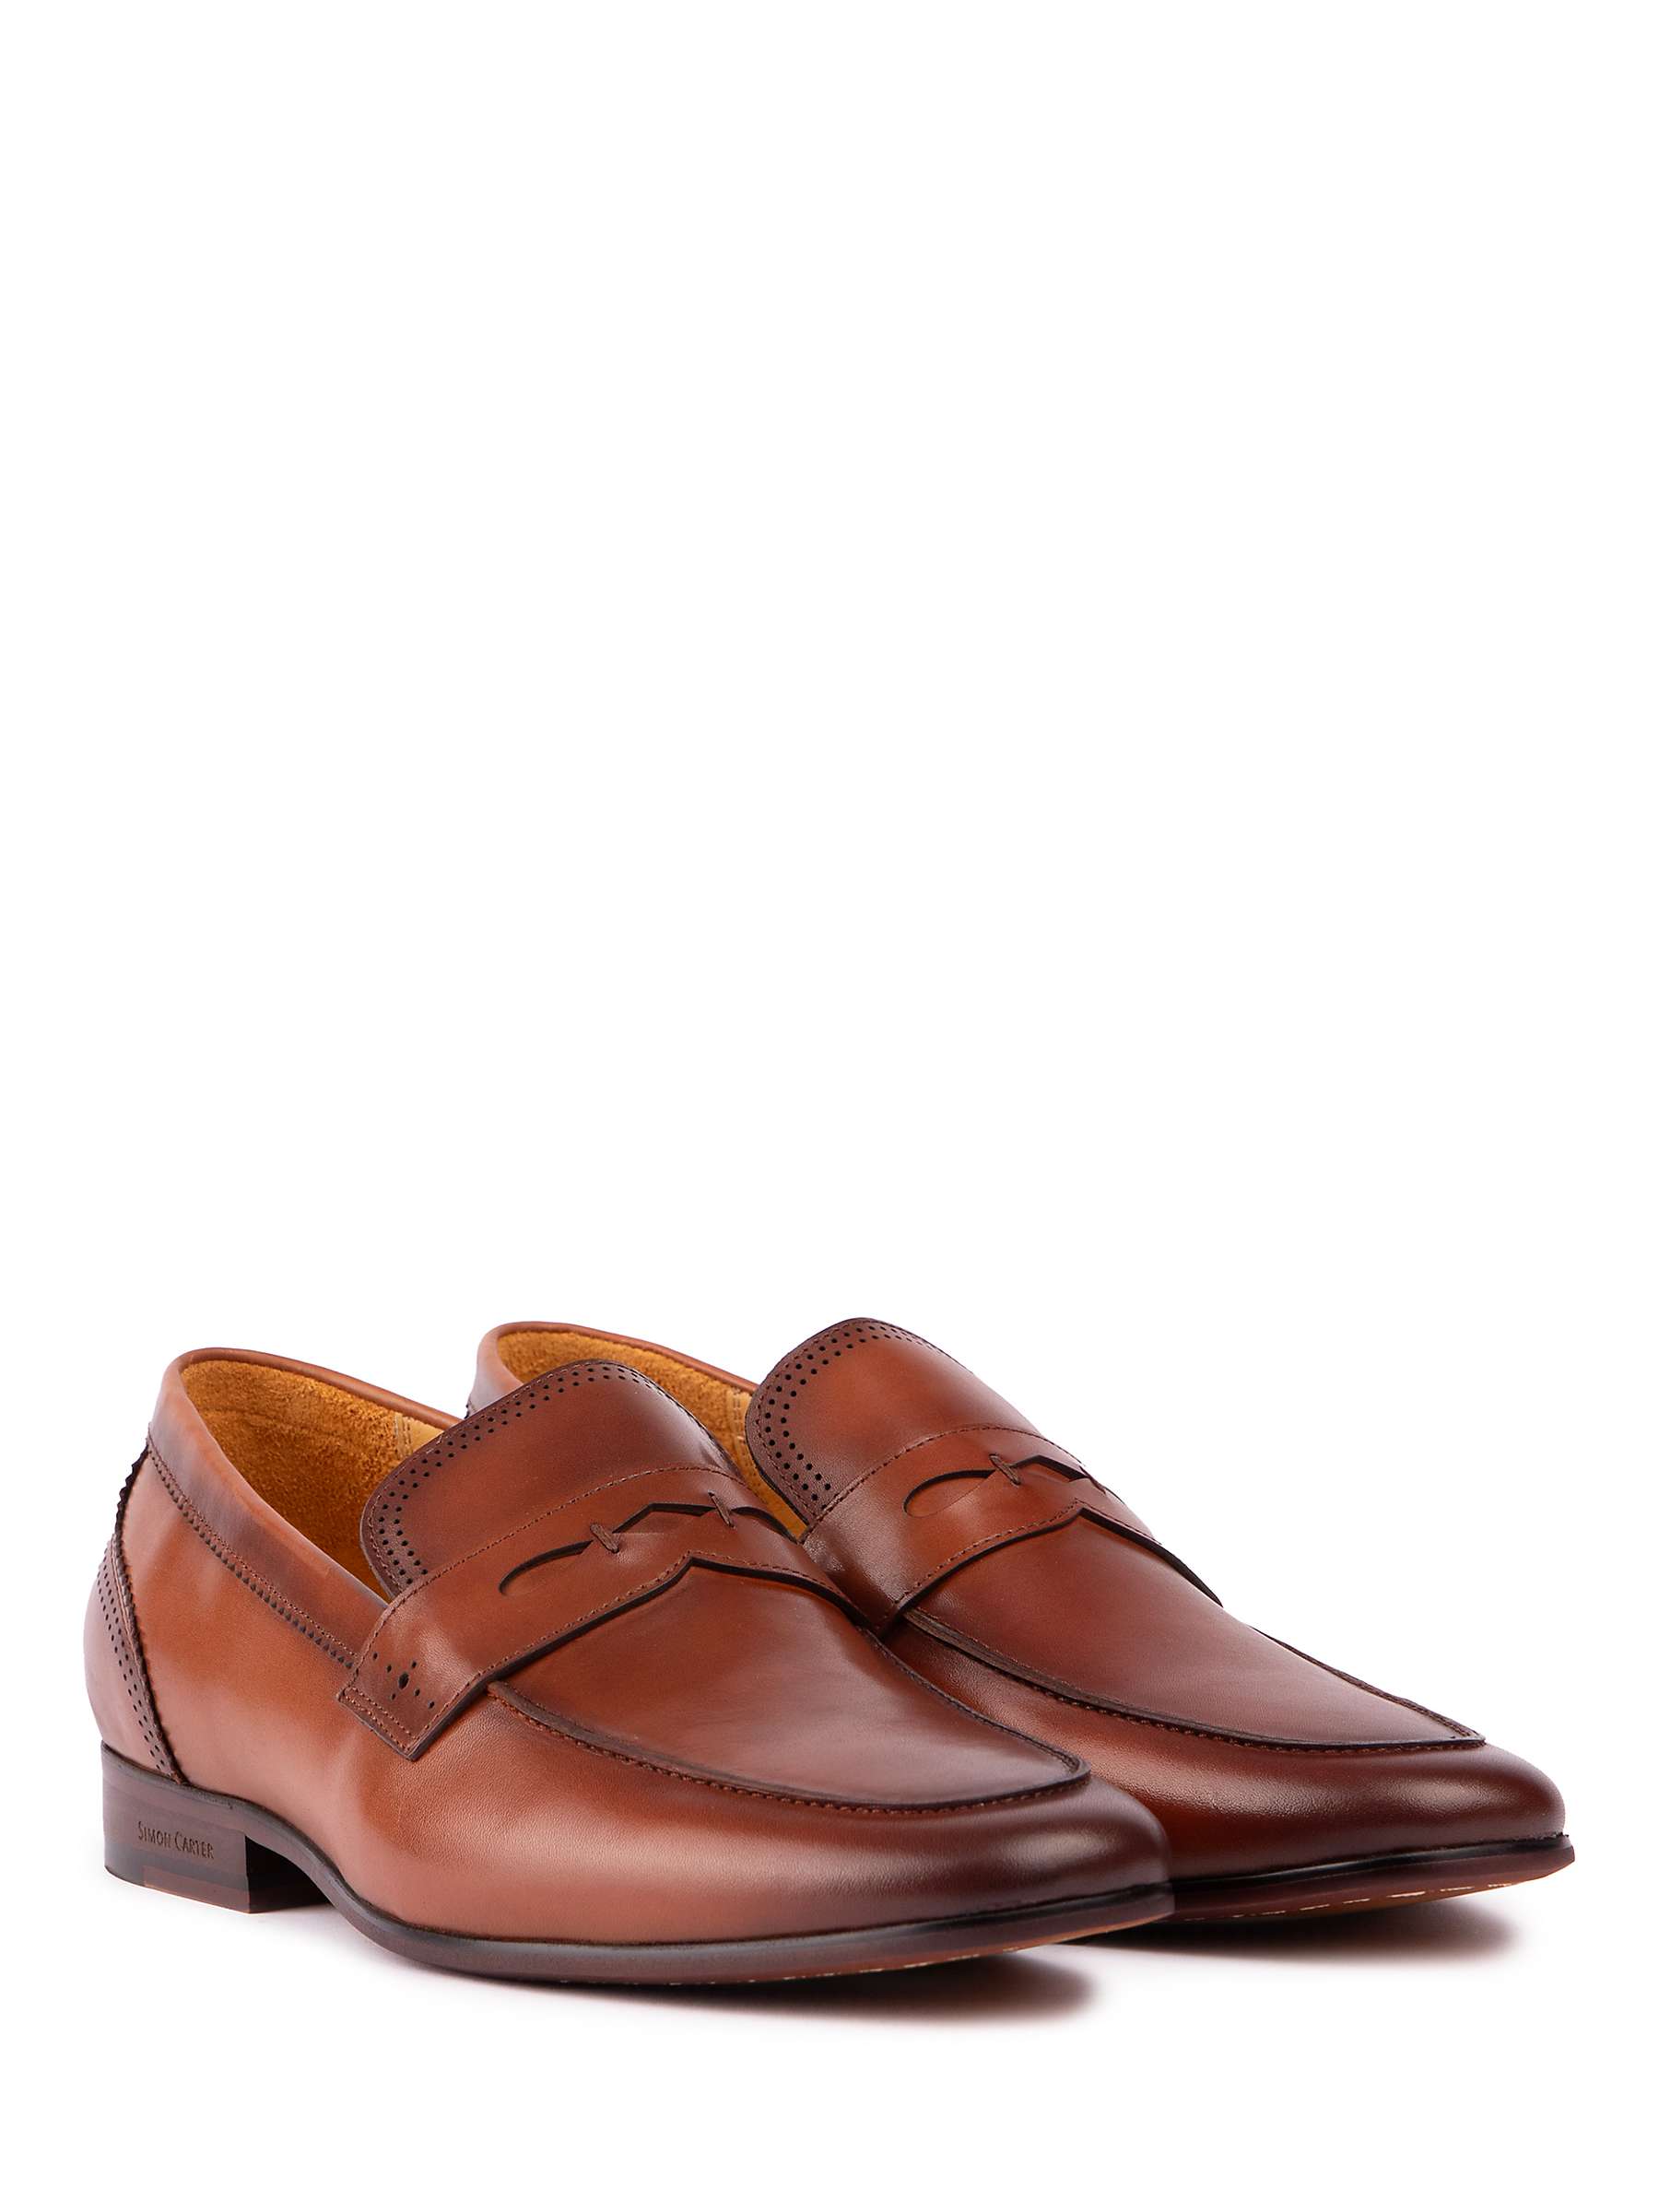 Buy Simon Carter Pike Leather Loafers Online at johnlewis.com